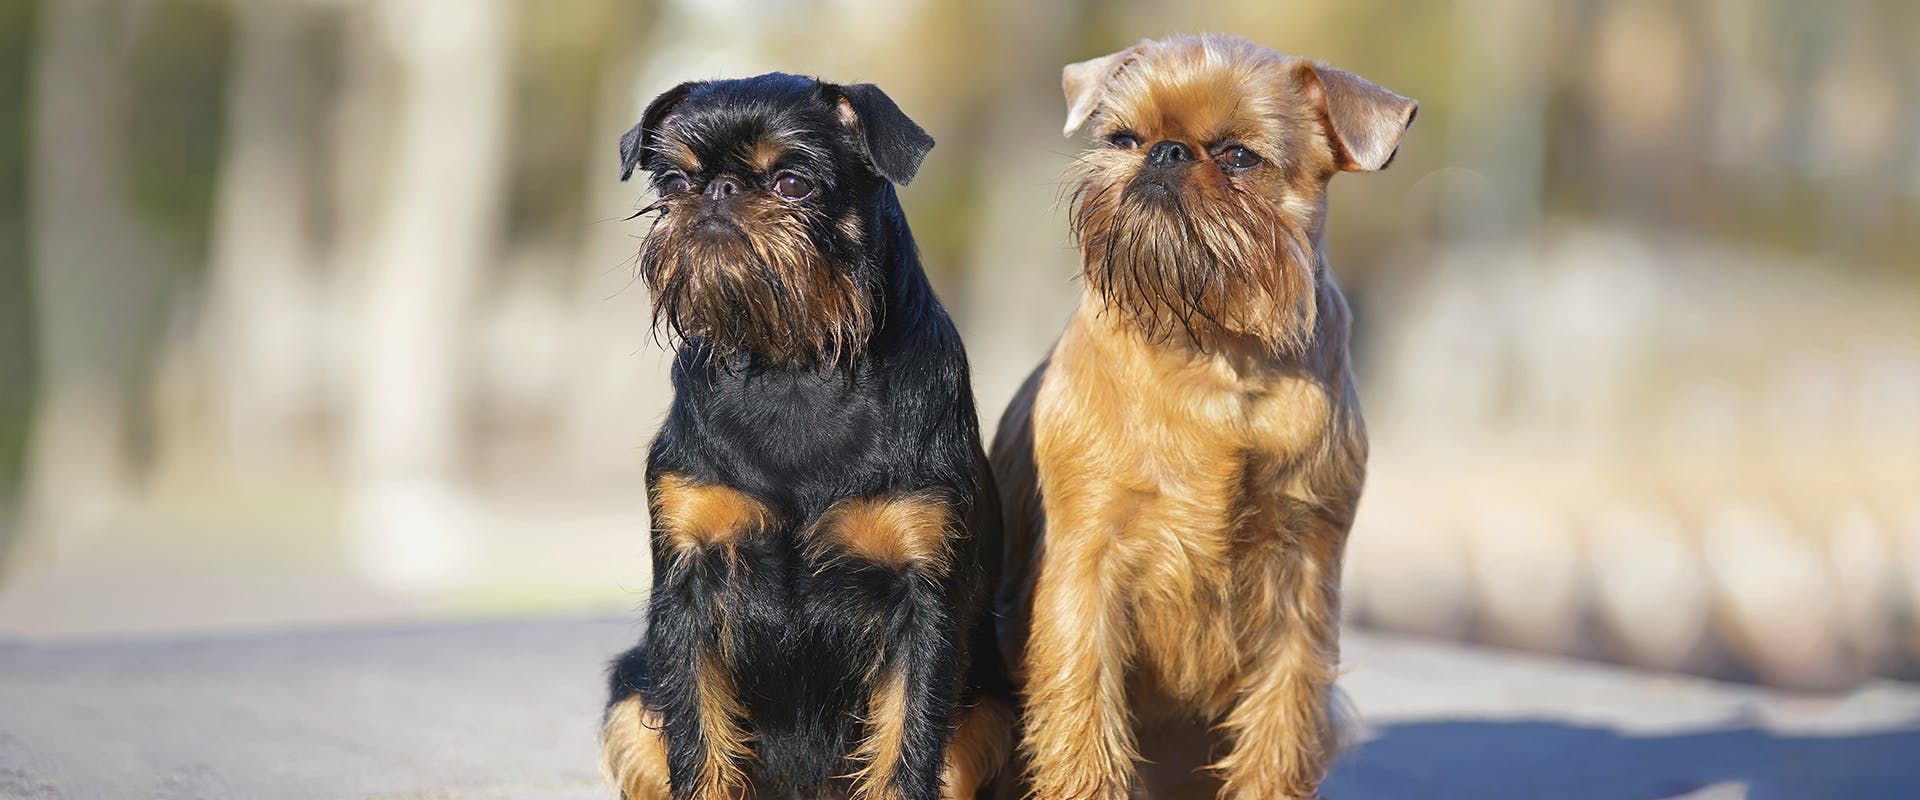 Two small Brussels Griffon dogs standing side by side outside in the sunlight 